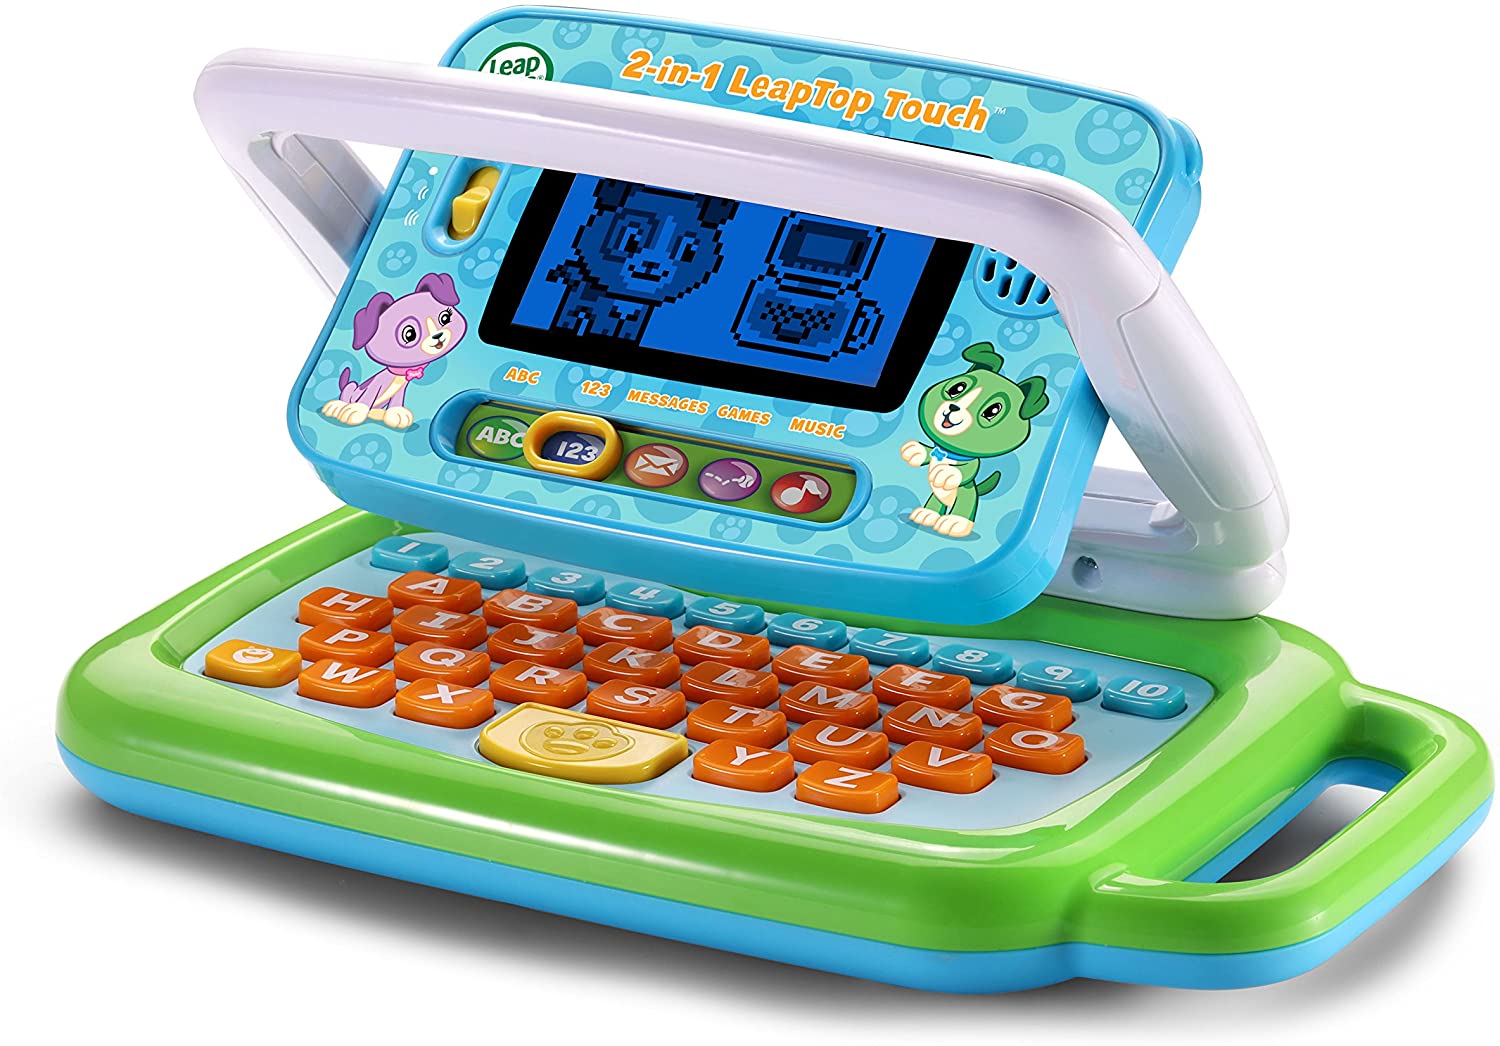 LeapFrog 2-in-1 LeapTop Touch, Green - Laptop Pretend Laptops For Toddlers